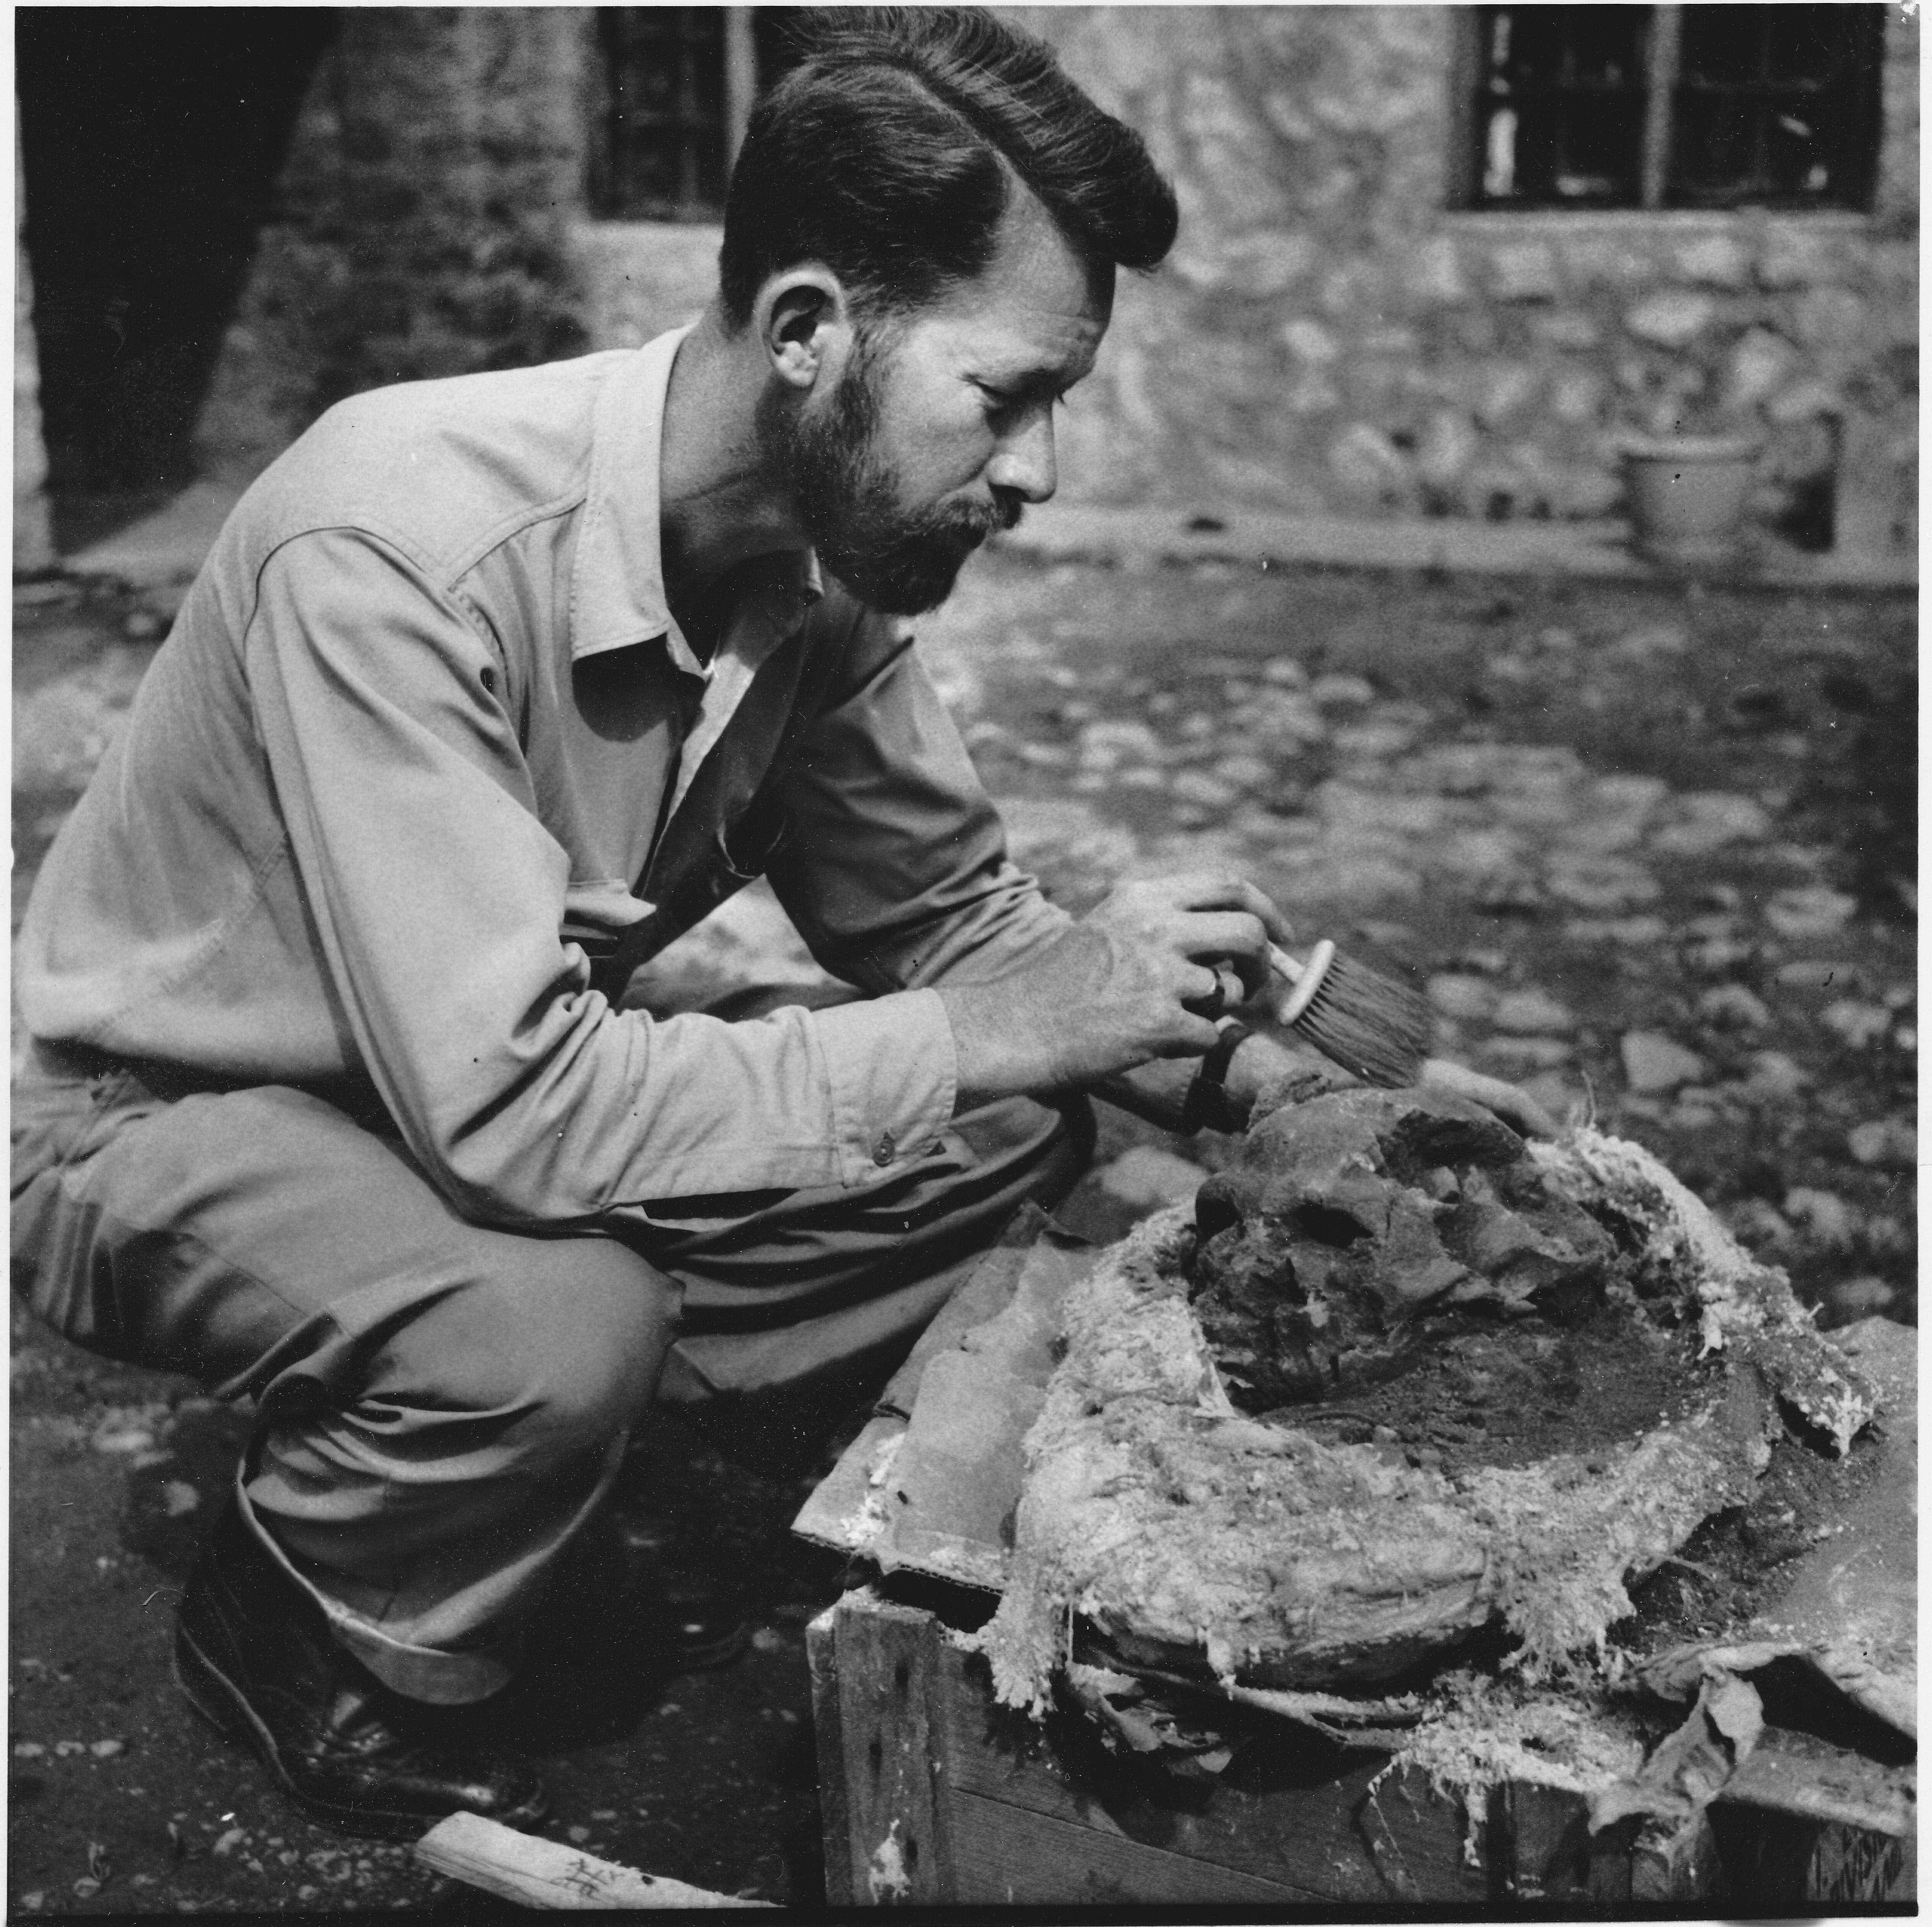 Philip Smith at Shanidar Cave in 1957